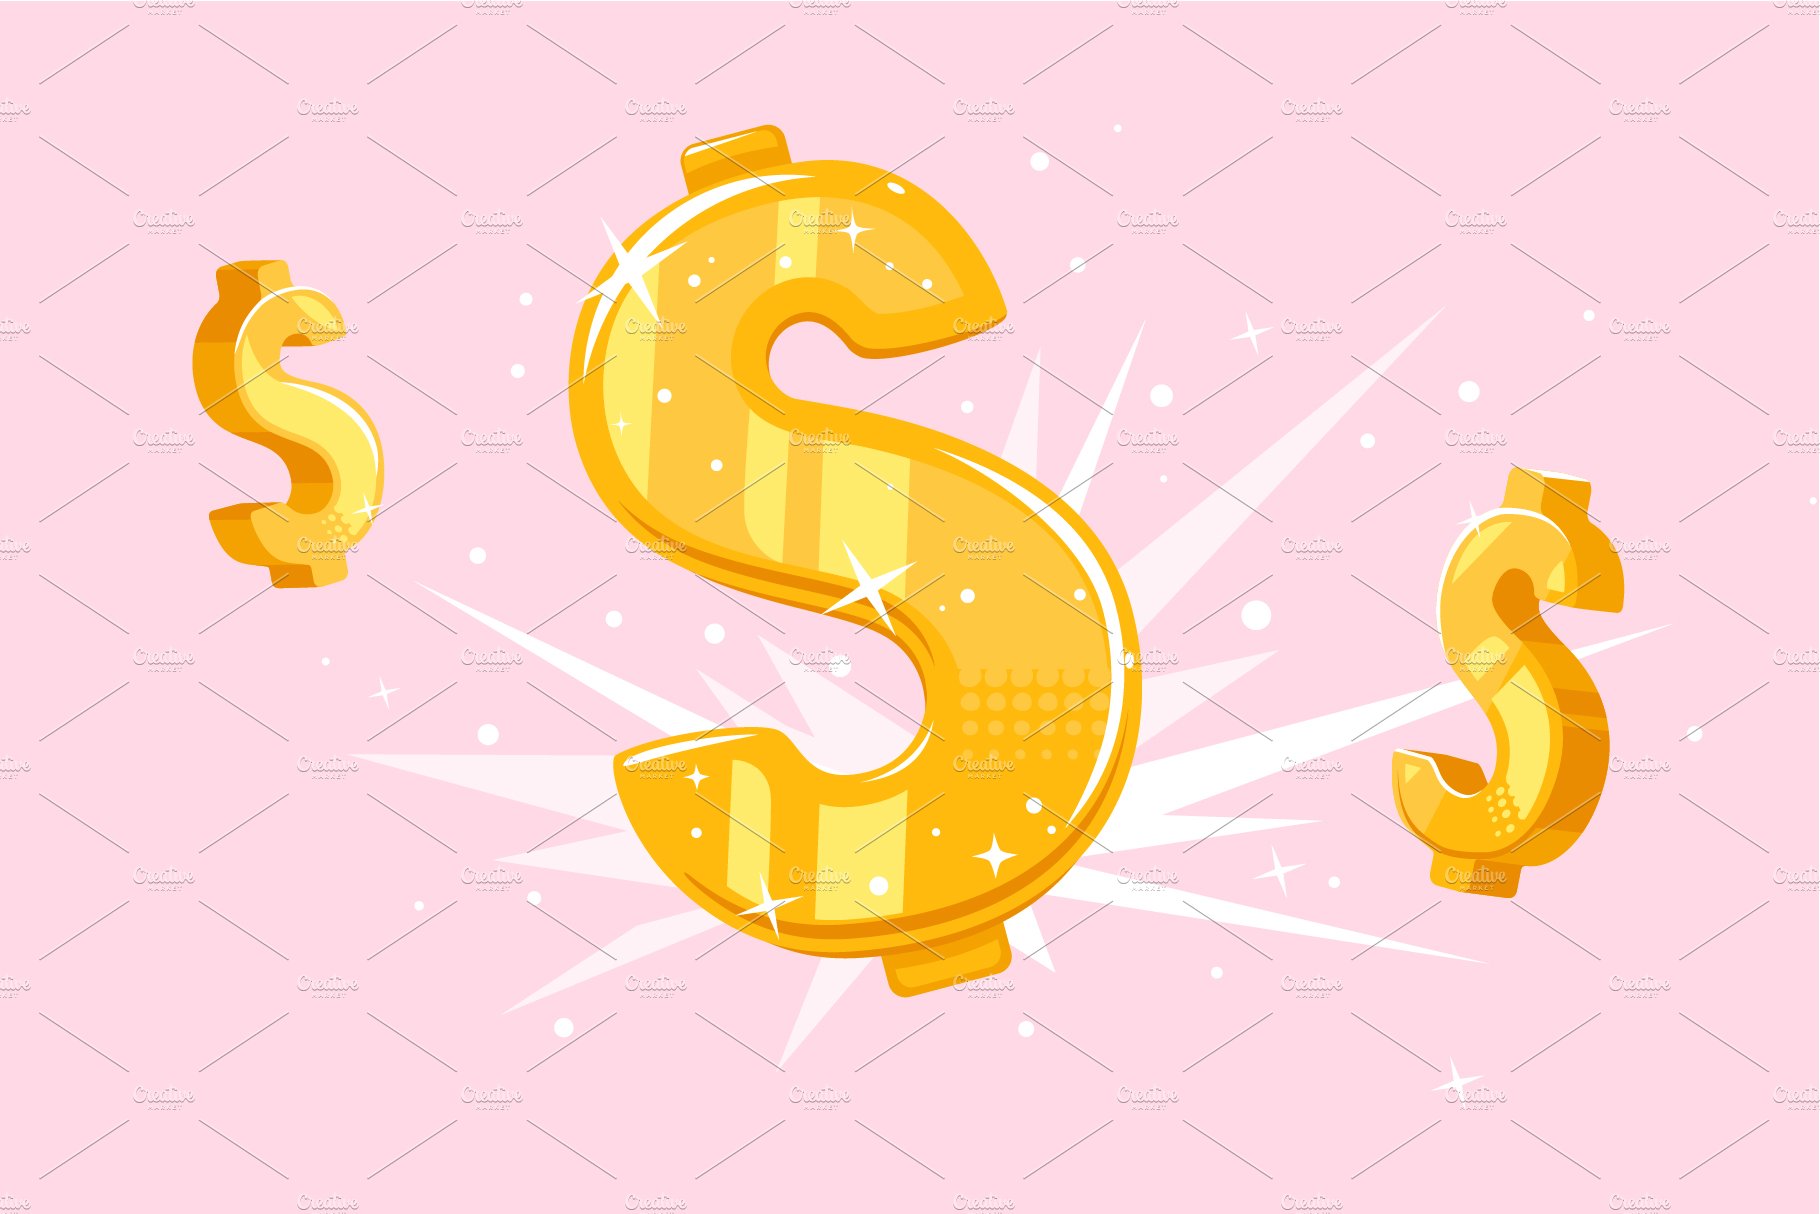 A golden dollar sign with sparkles on a pink background.